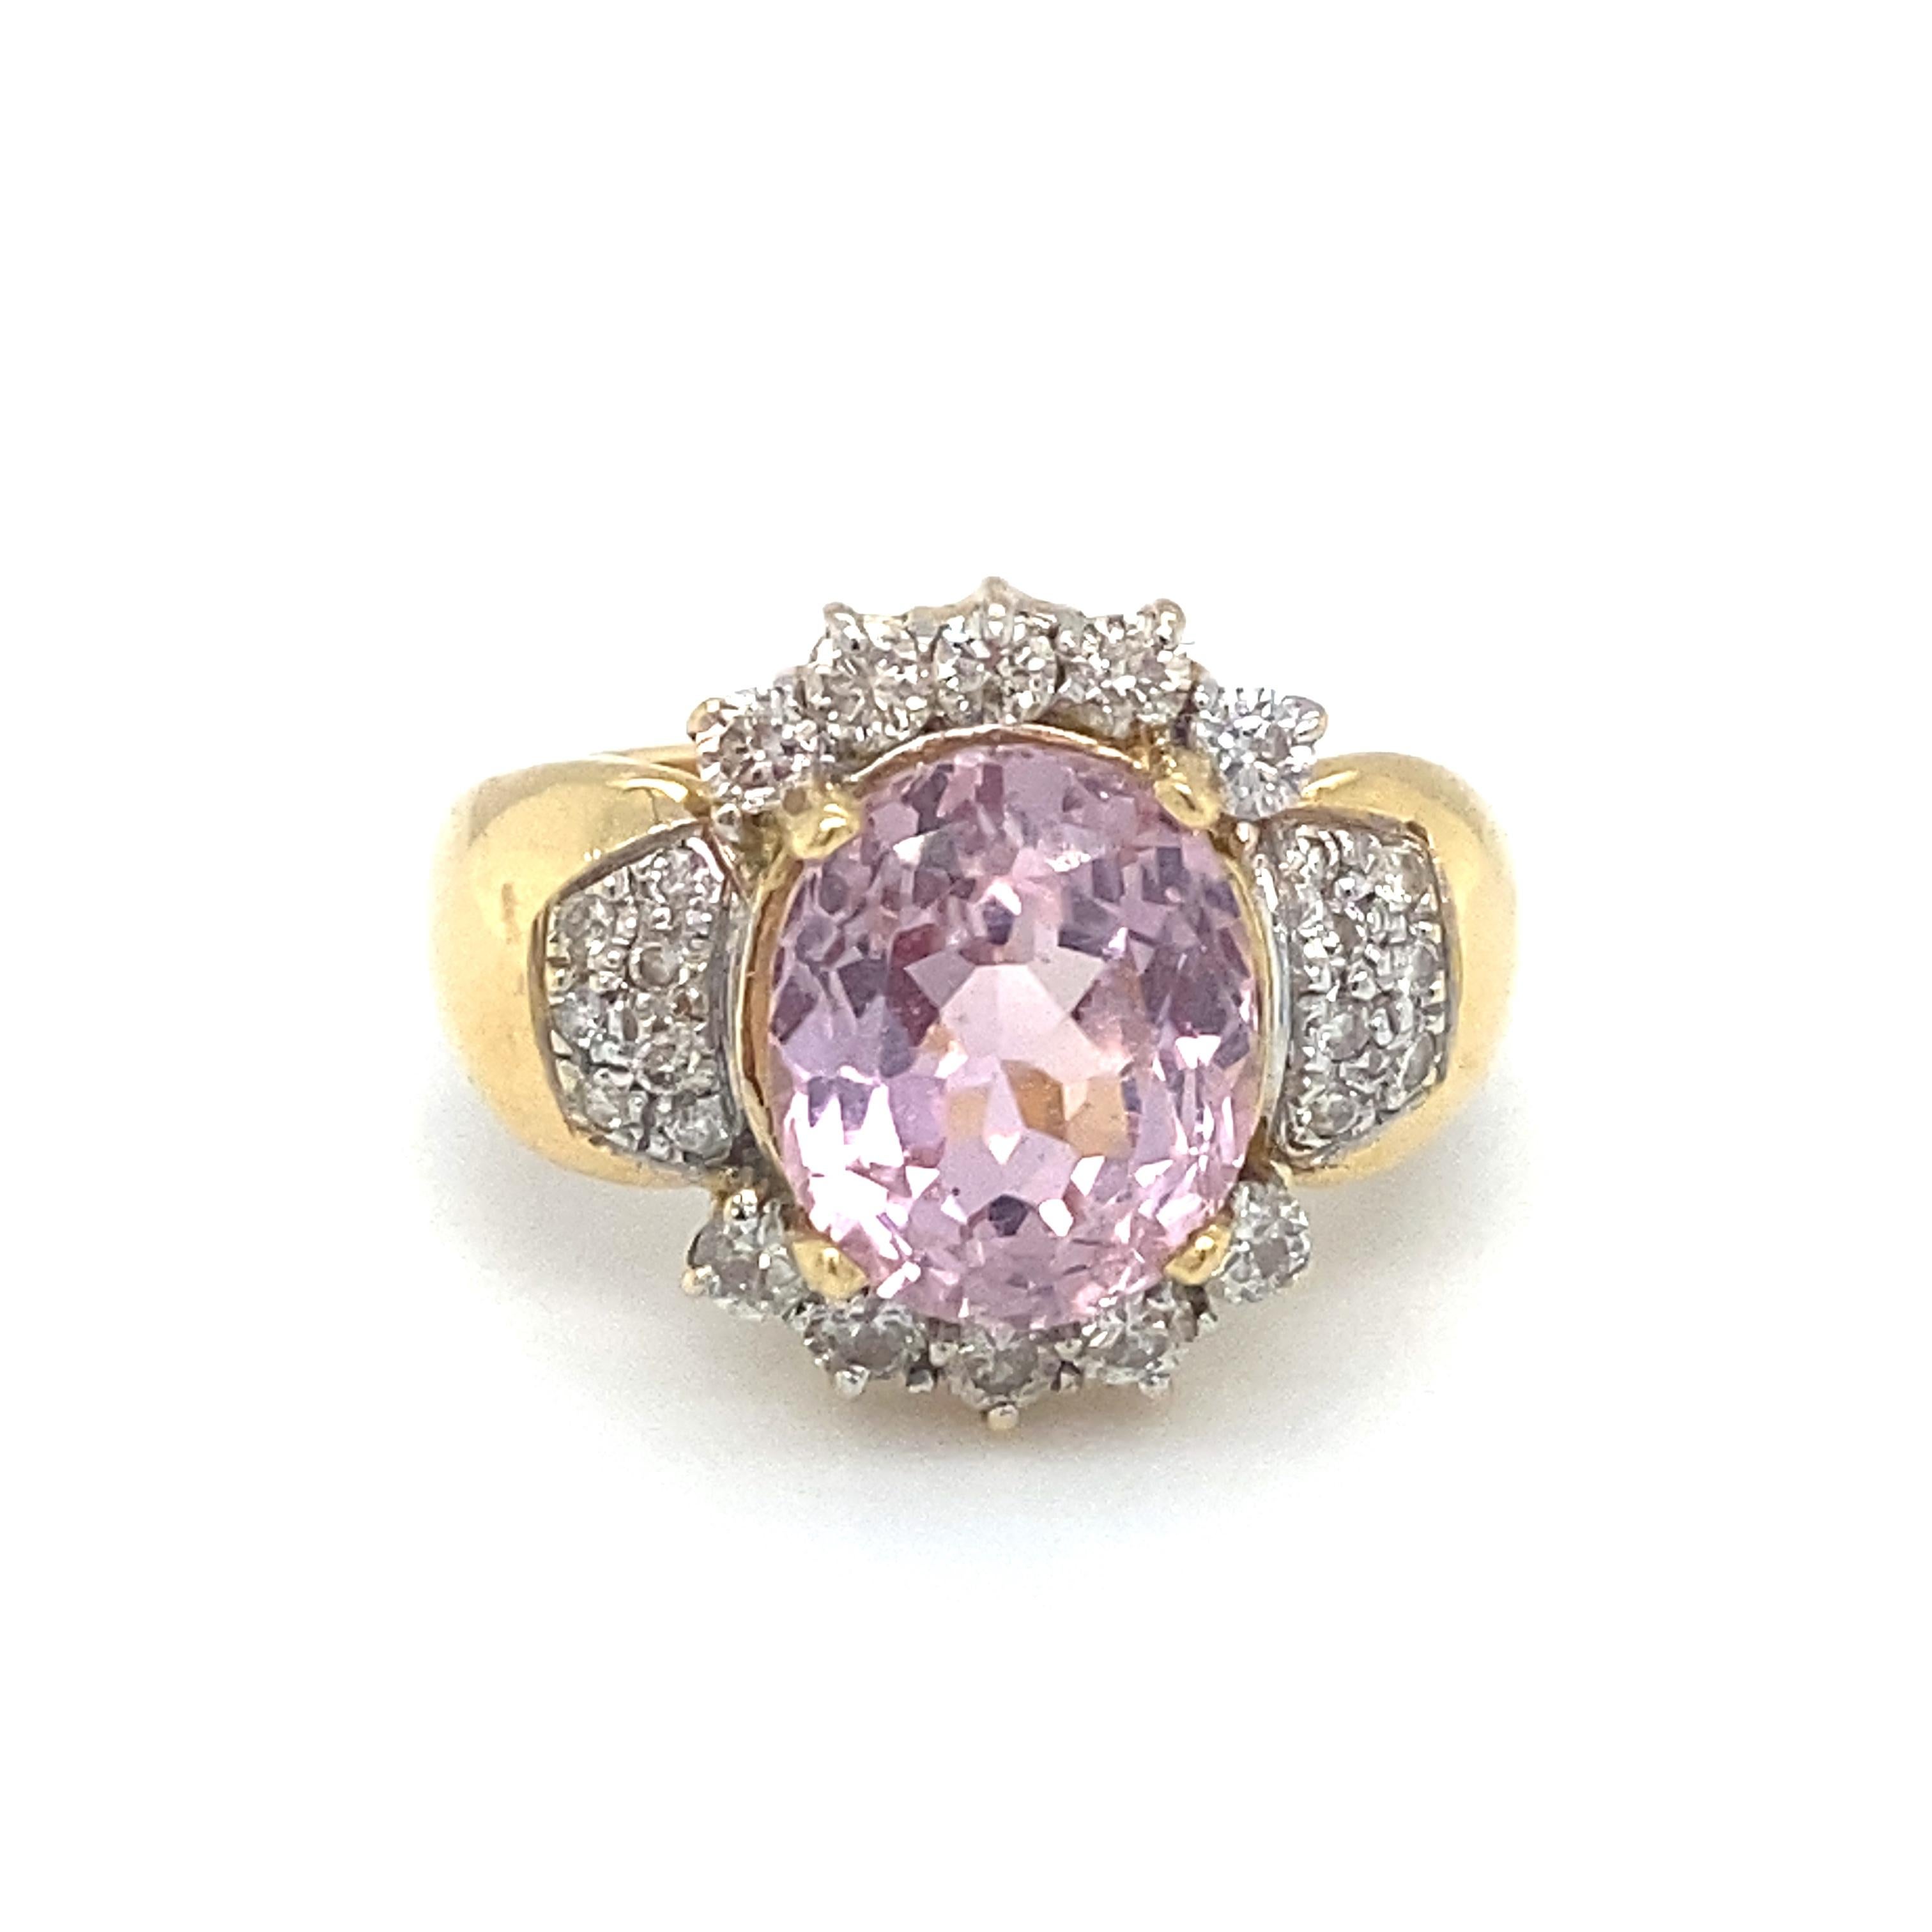 Le Vian 3.0ct Kunzite and Diamond Cocktail Ring in 18k Gold In Excellent Condition For Sale In Atlanta, GA